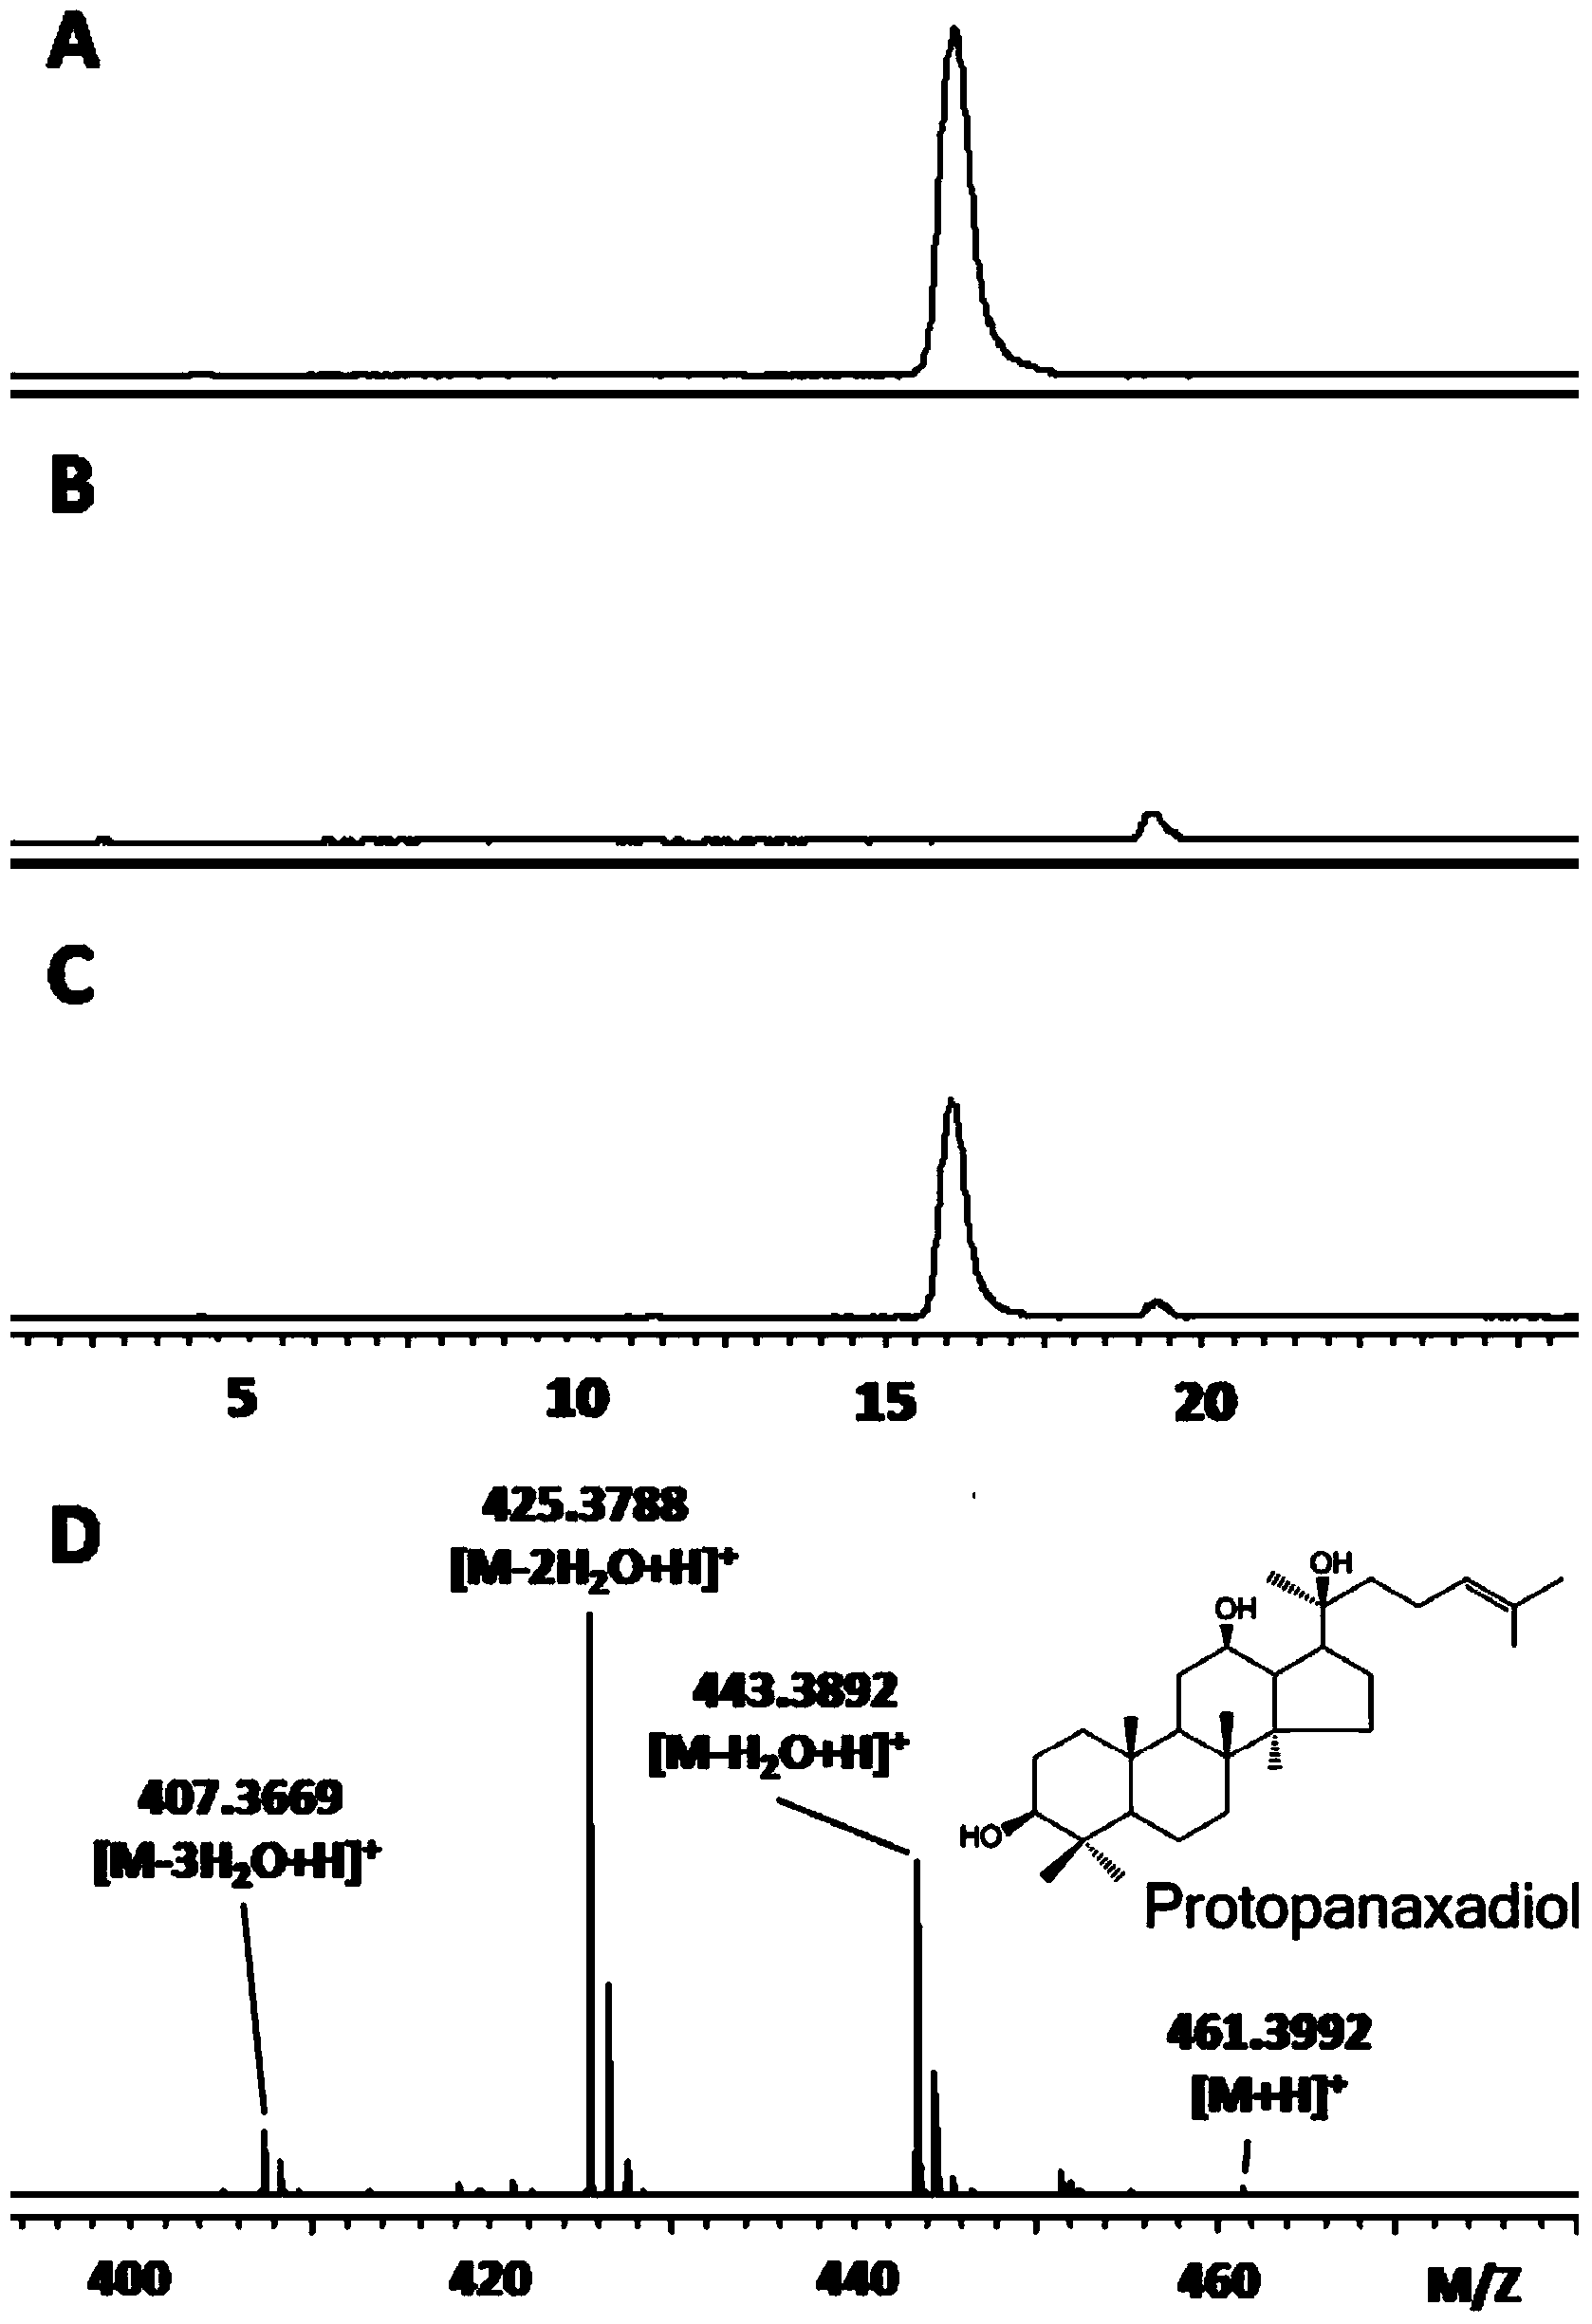 Recombinant saccharymyces cerevisiae for producing ginsengenins as well as construction method and application of same